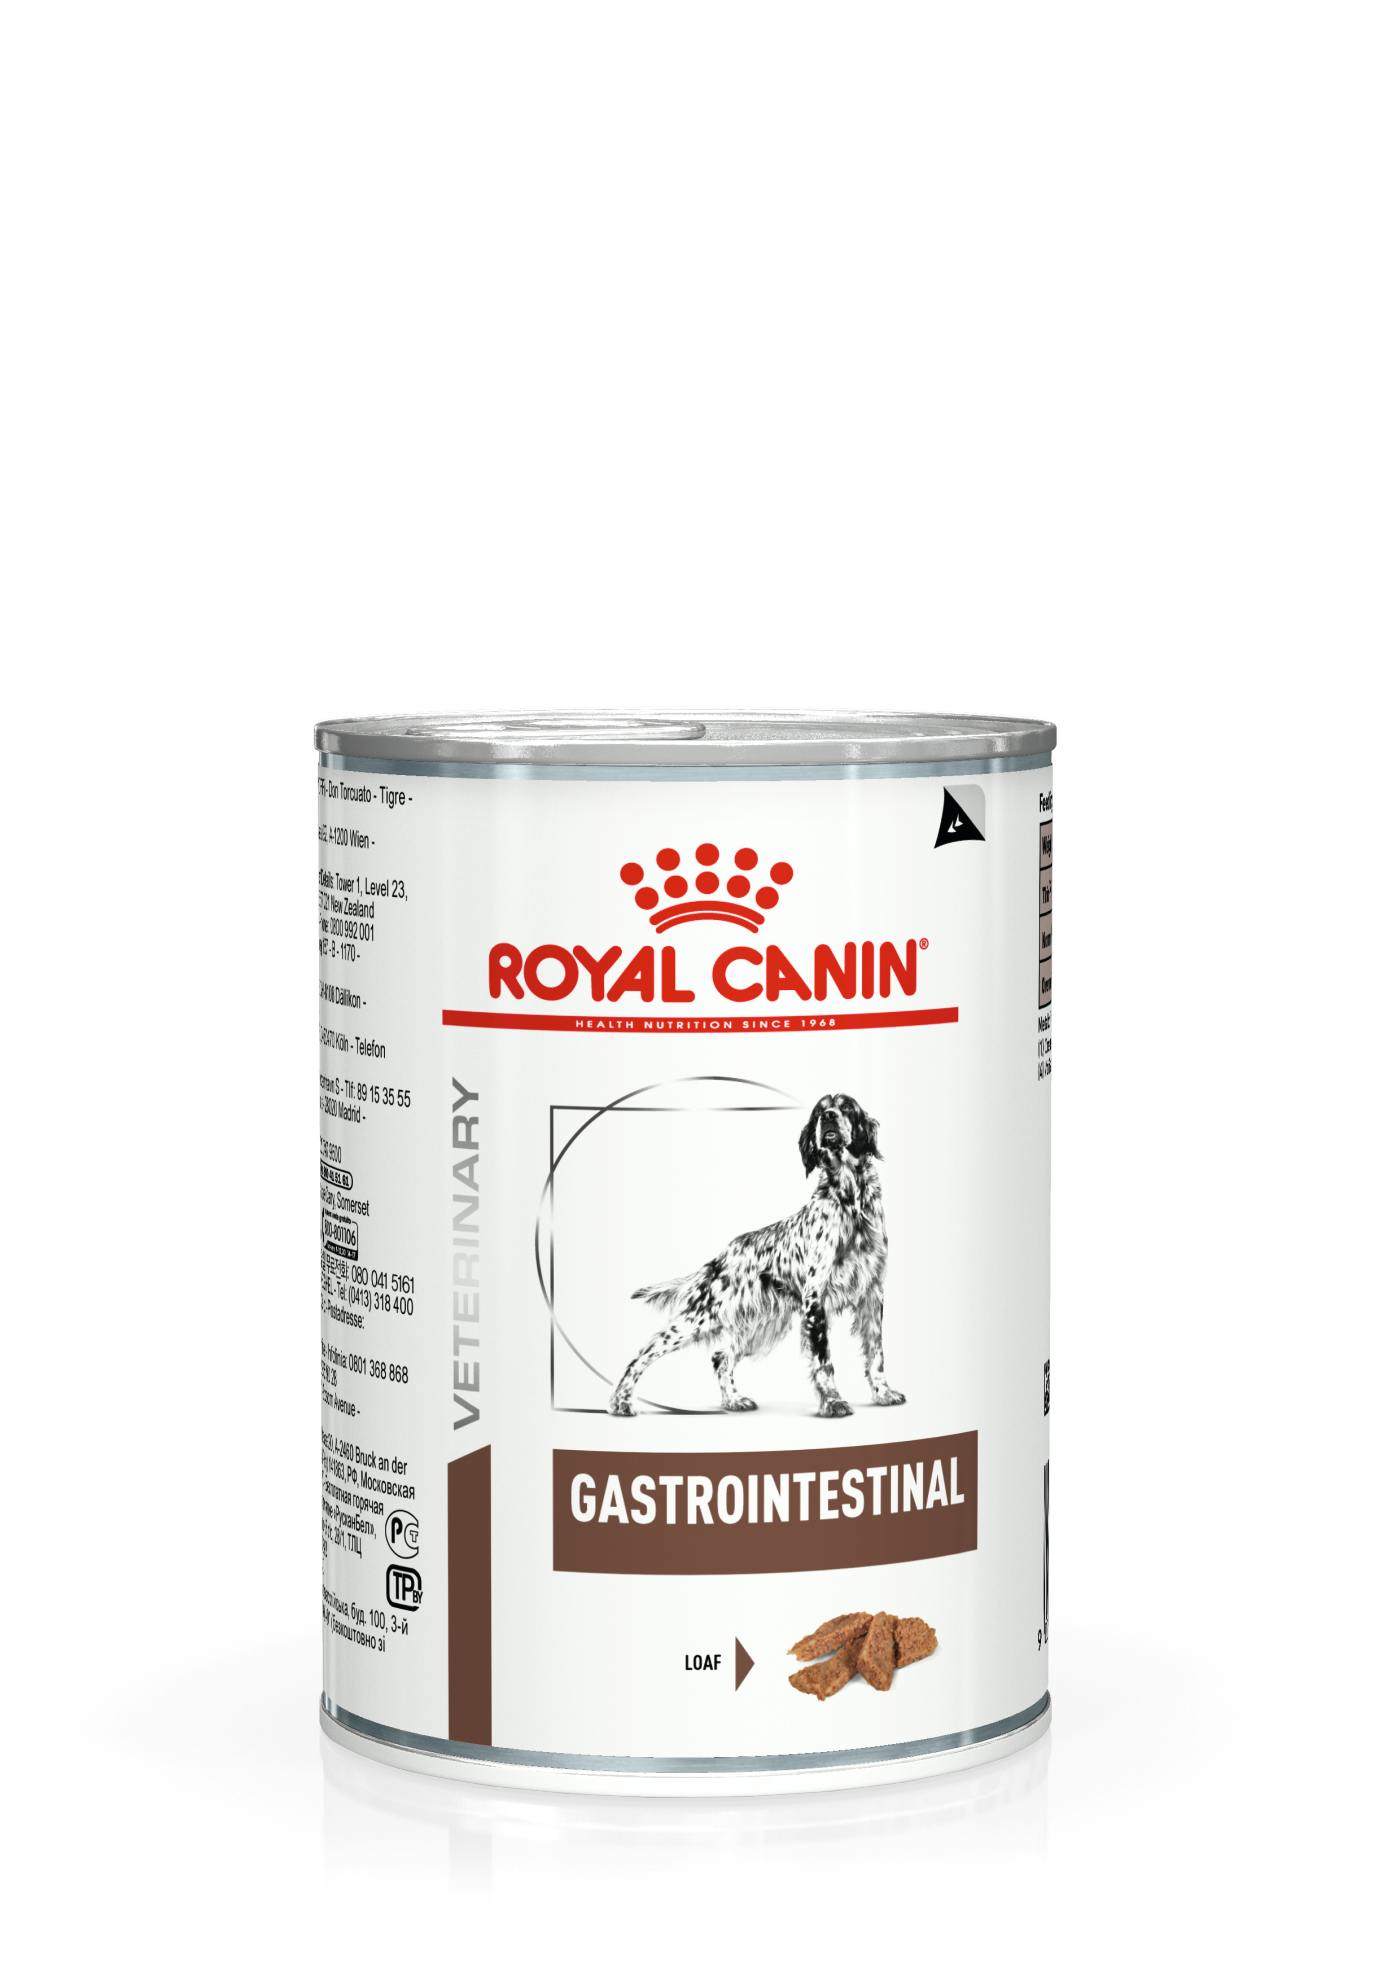 fame Nuclear For a day trip Gastrointestinal Can wet | Royal Canin